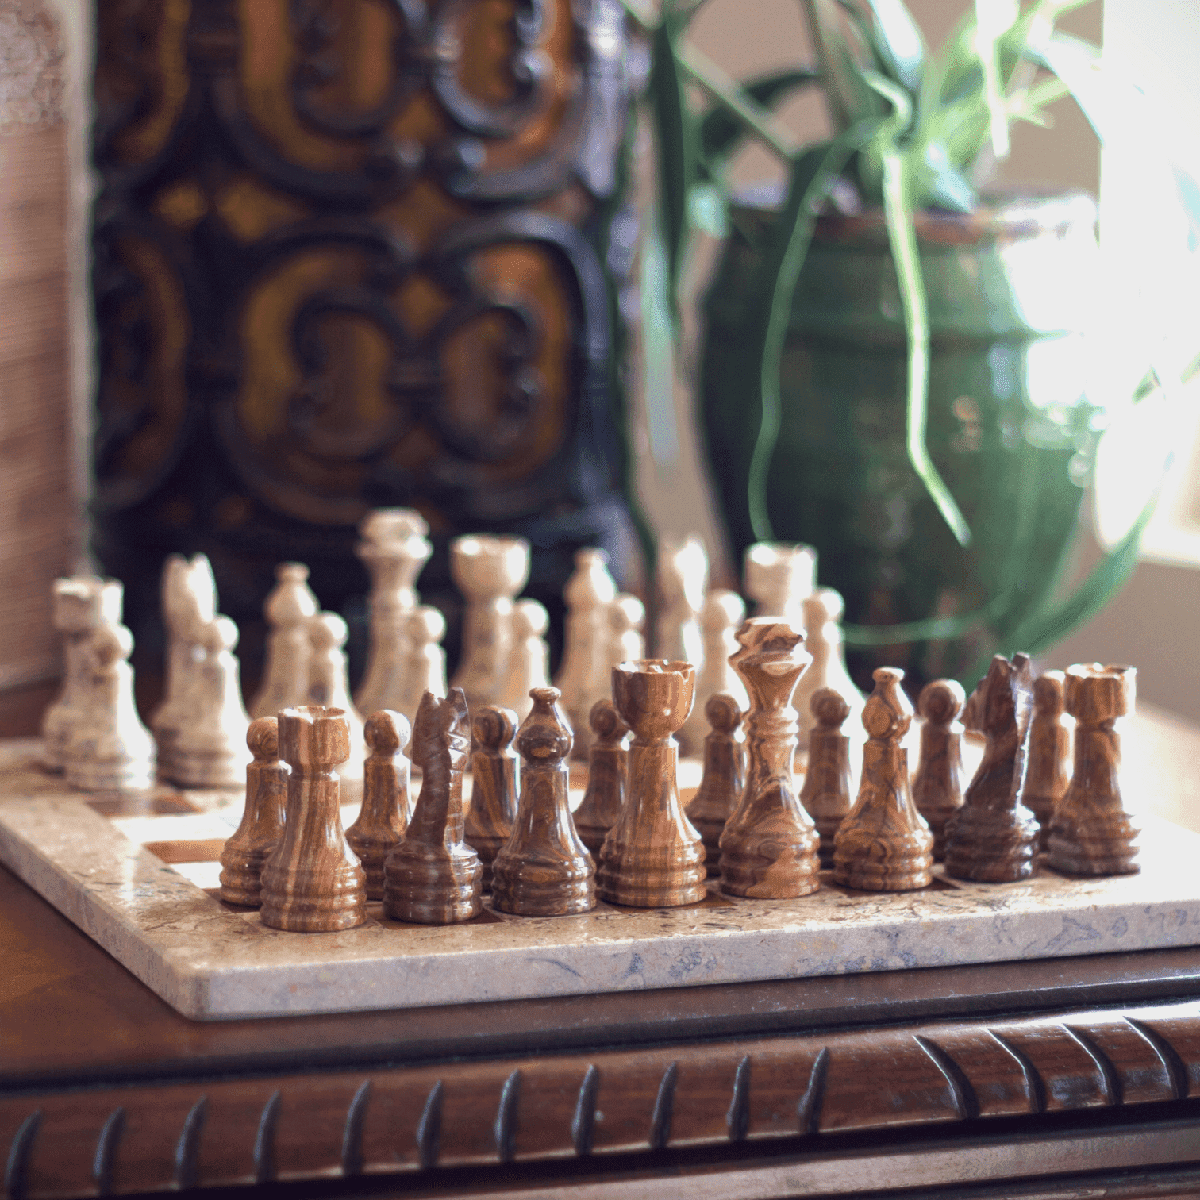 Marble Chess Set with Storage Case - Coffee and Brown - Marble Cultures